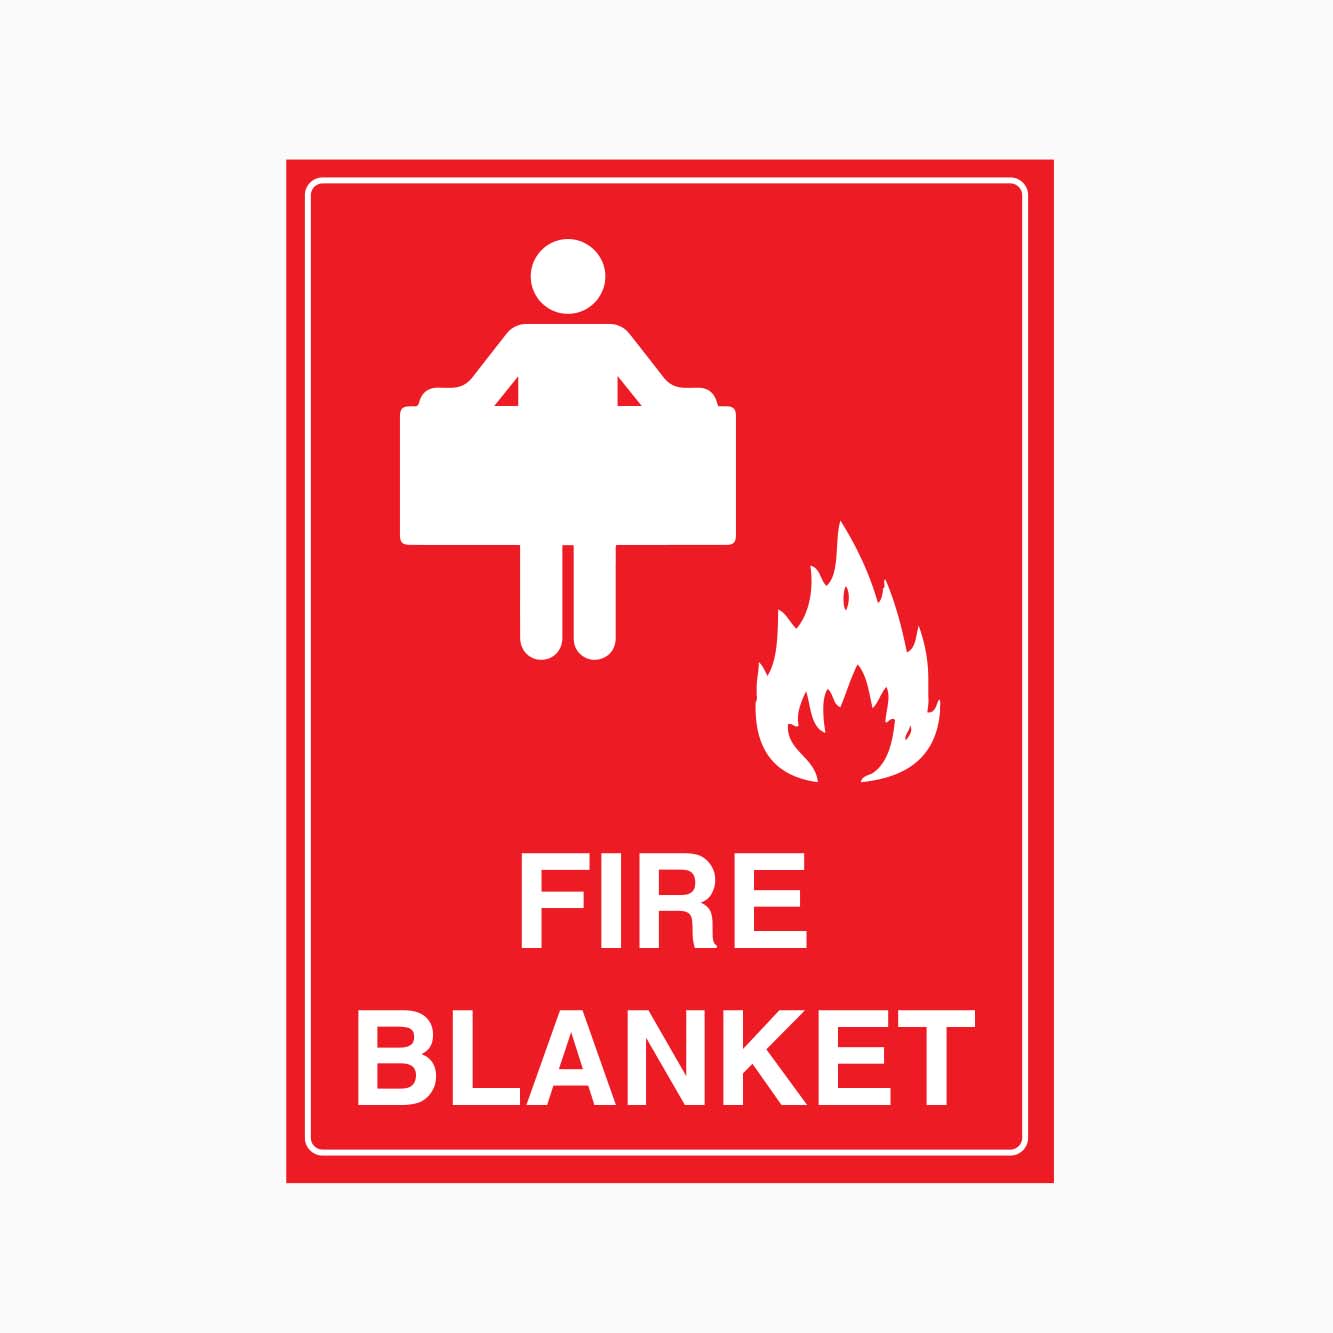 FIRE BLANKET SIGN - GET SIGNS SUPPLY FIRE SAFETY SIGNS